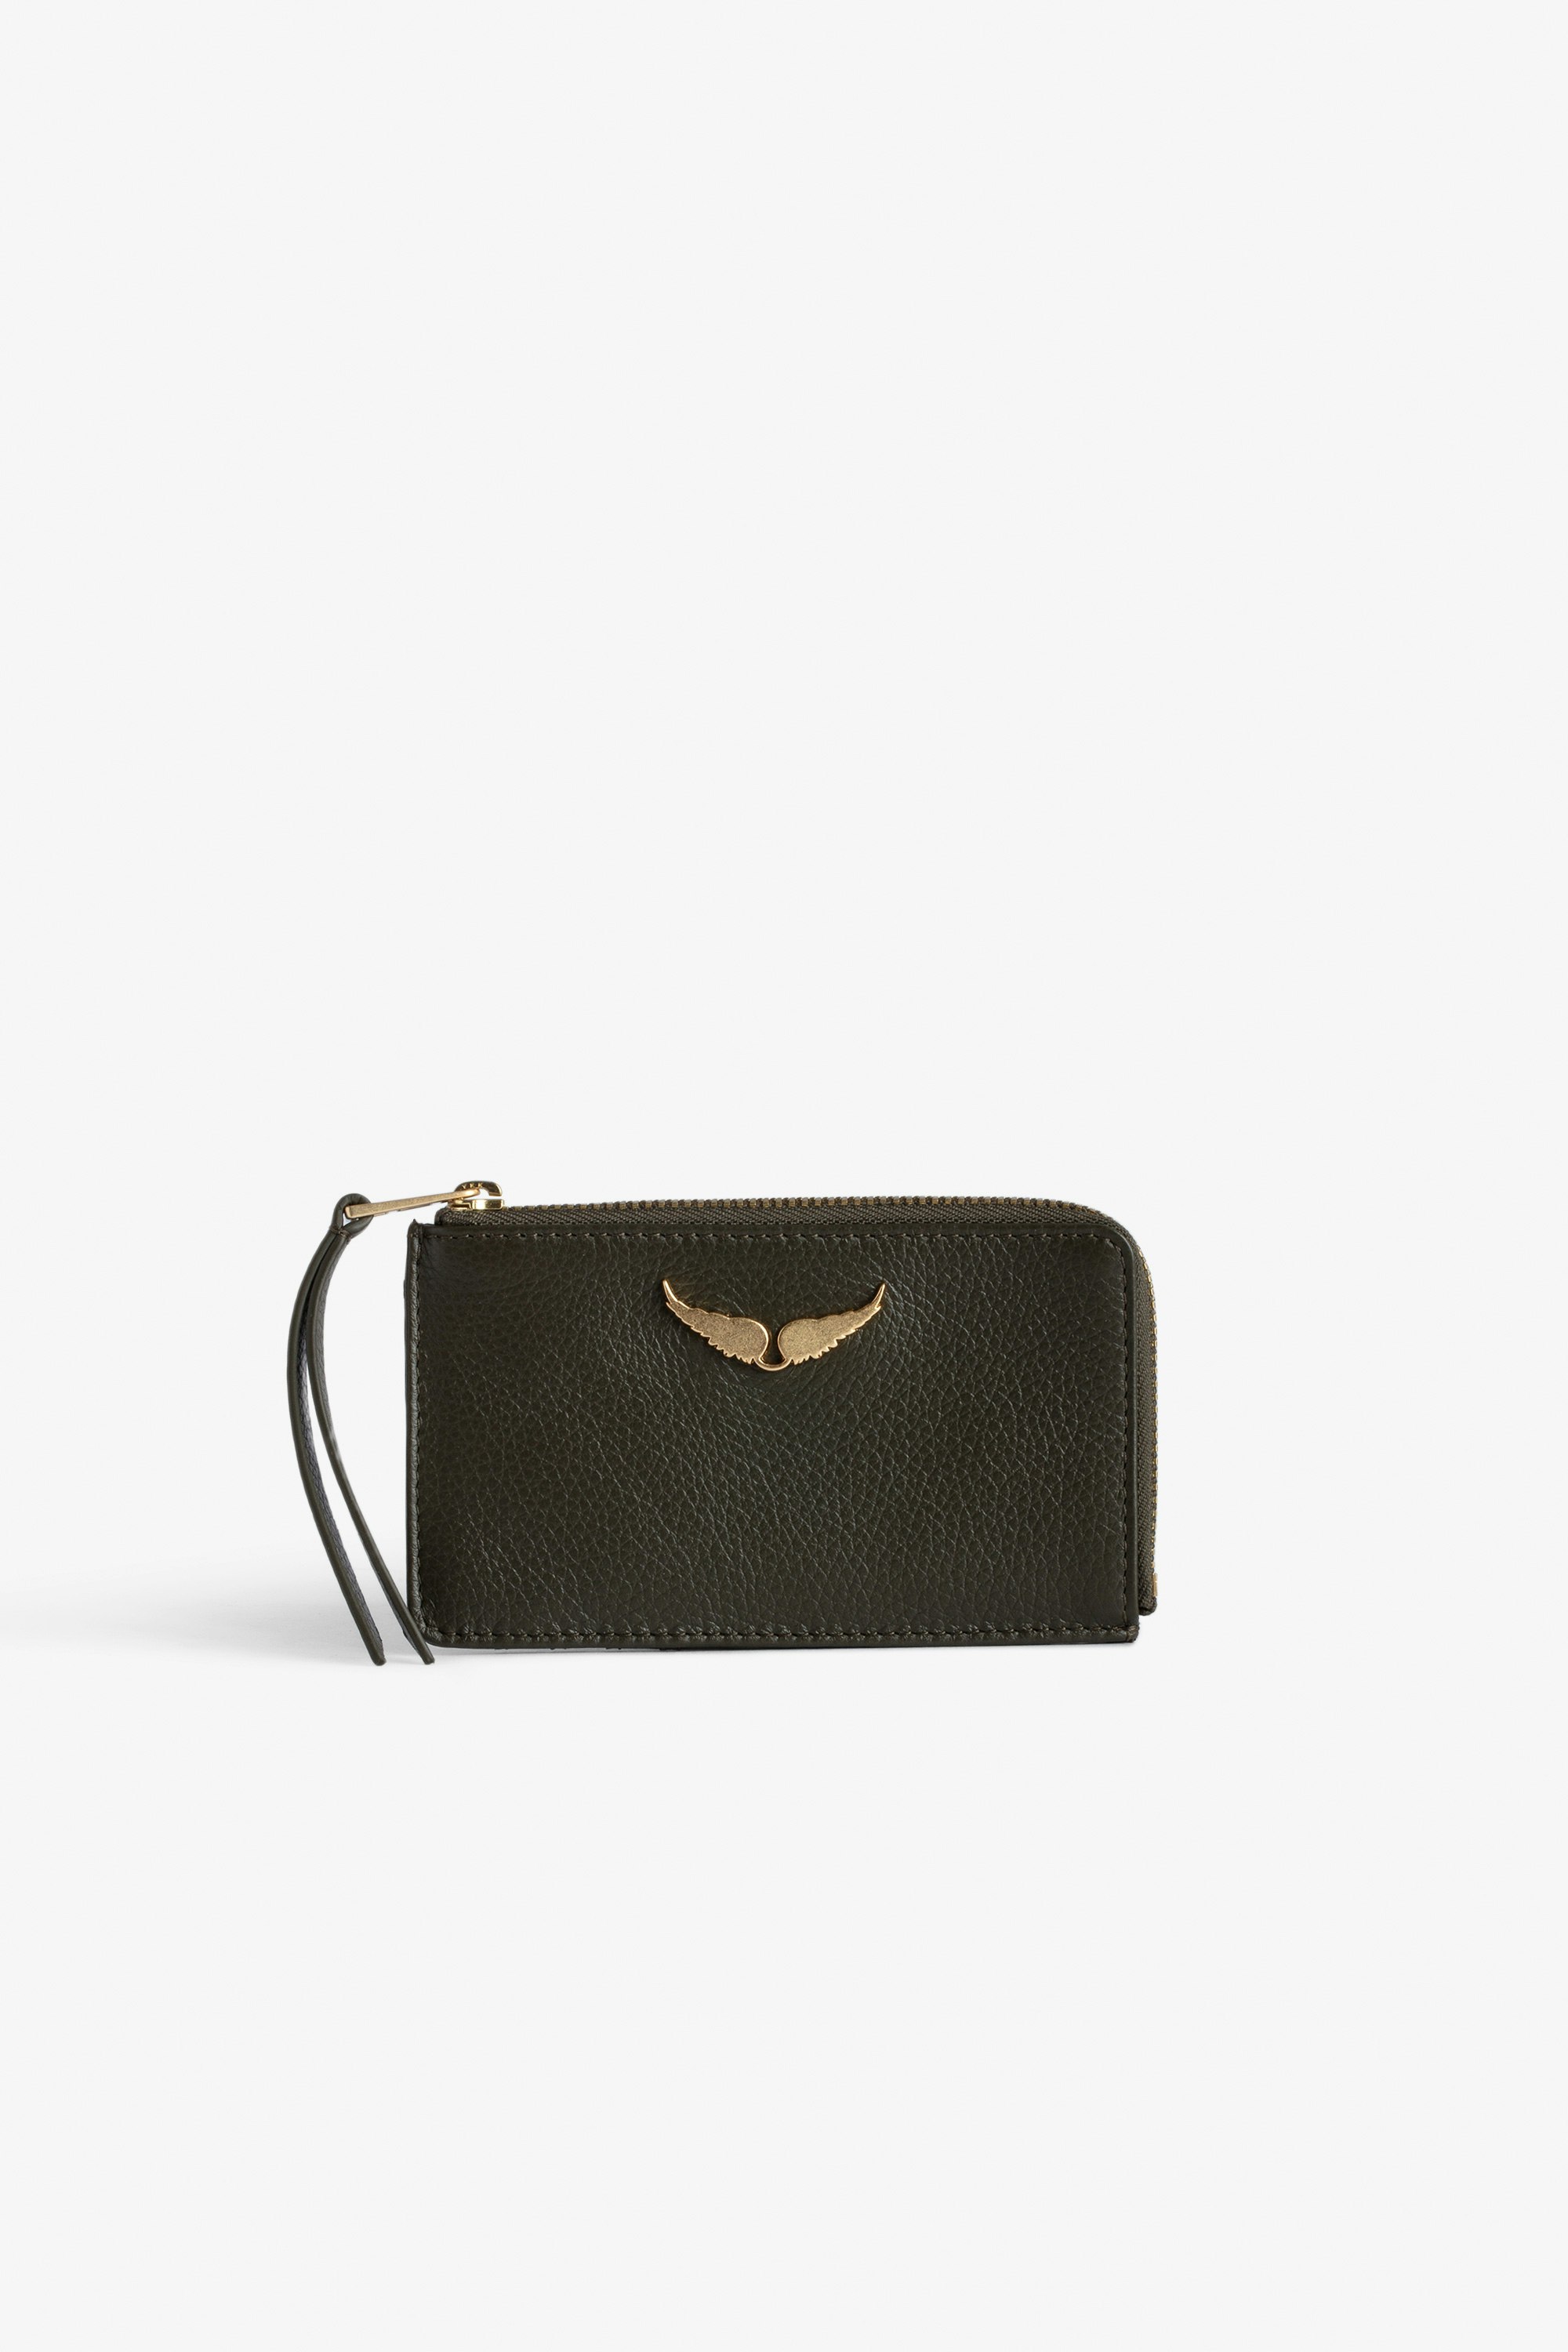 ZV Card Card Holder - Women’s khaki grained leather card holder with wings charm.